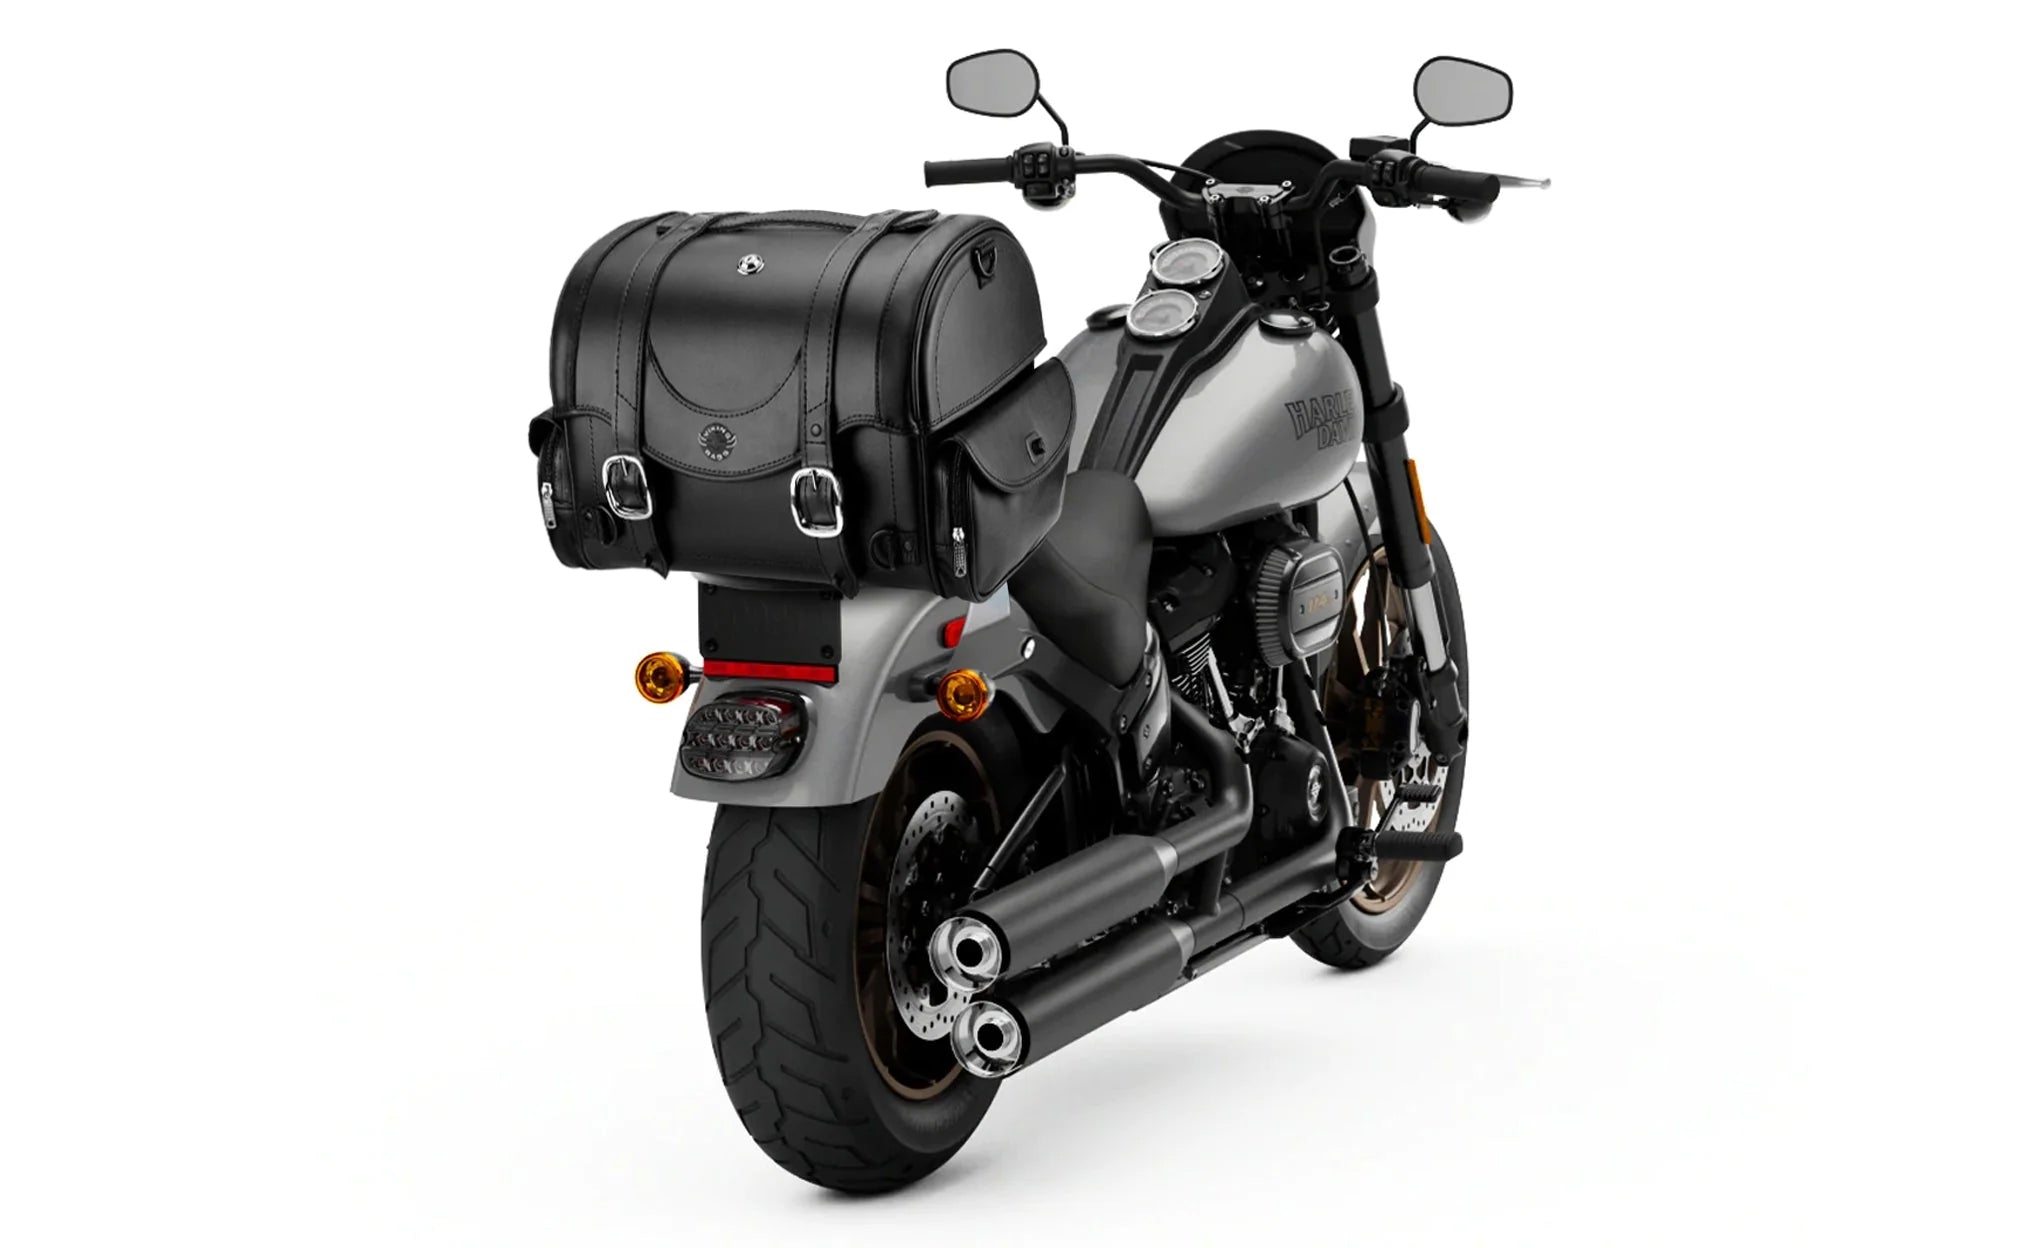 21L - Century Medium Triumph Leather Motorcycle Roll Bag on Bike Photo @expand